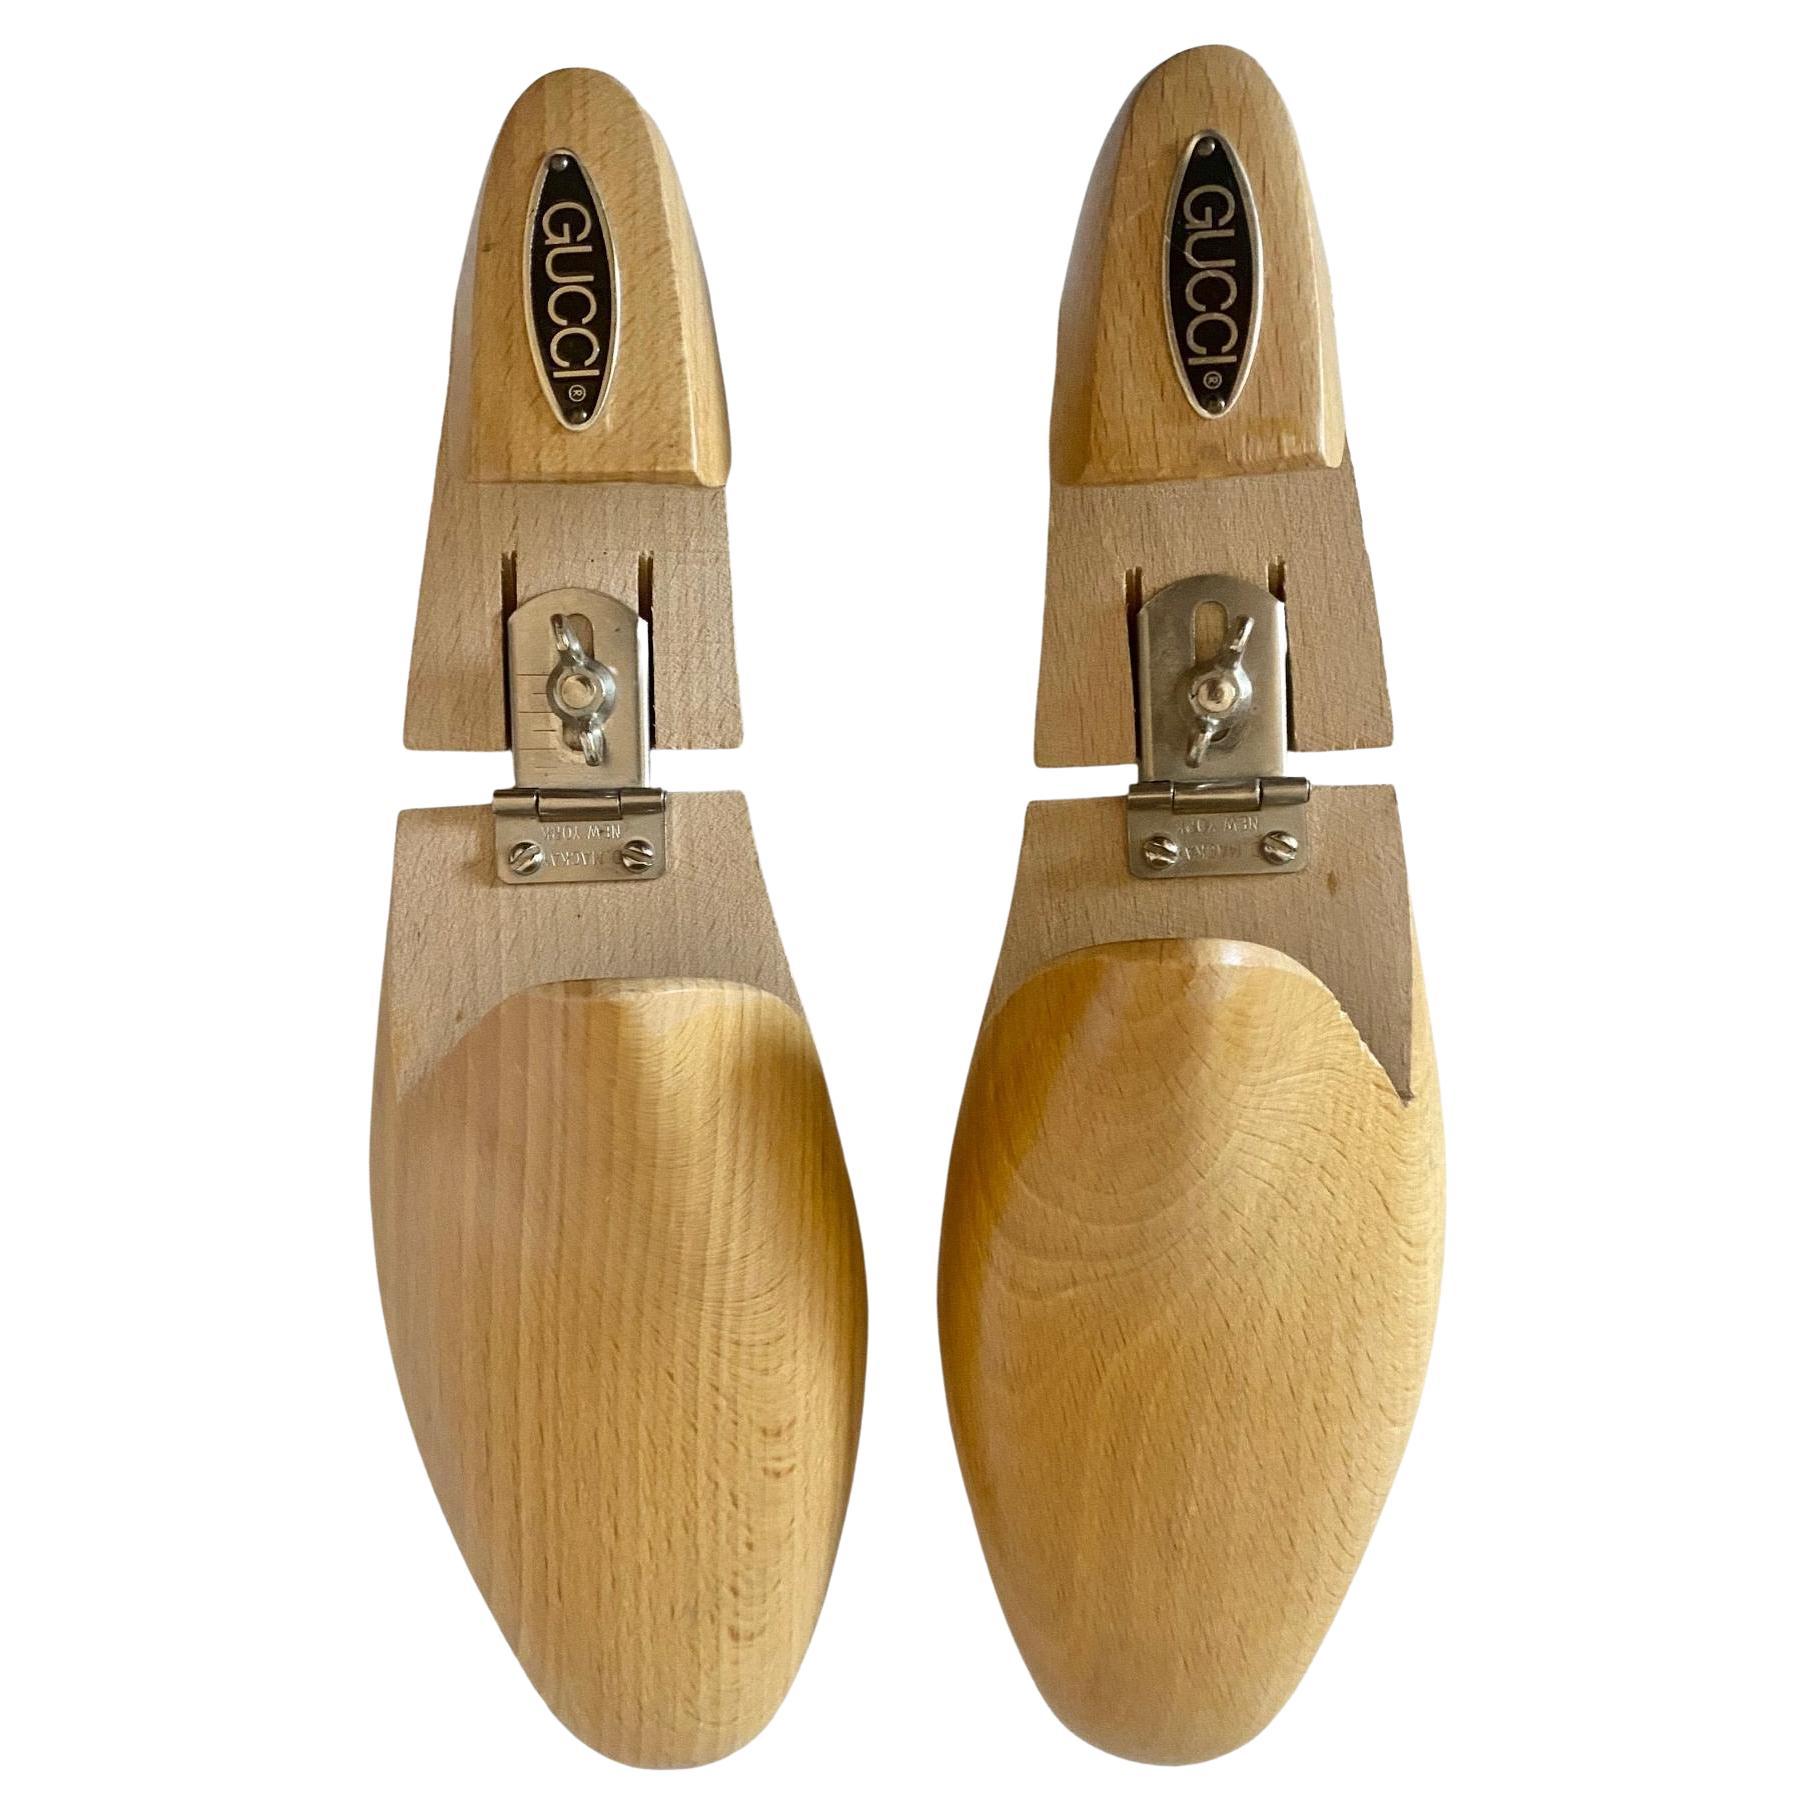 Dating back to 1960s New York, these exquisite Gucci wooden shoe trees possess an eternal sophistication, perfect to be both employed for personal use or as an ornamental component of a residence.

Size: 43 IT - adjustable 

Condition: 1960s,